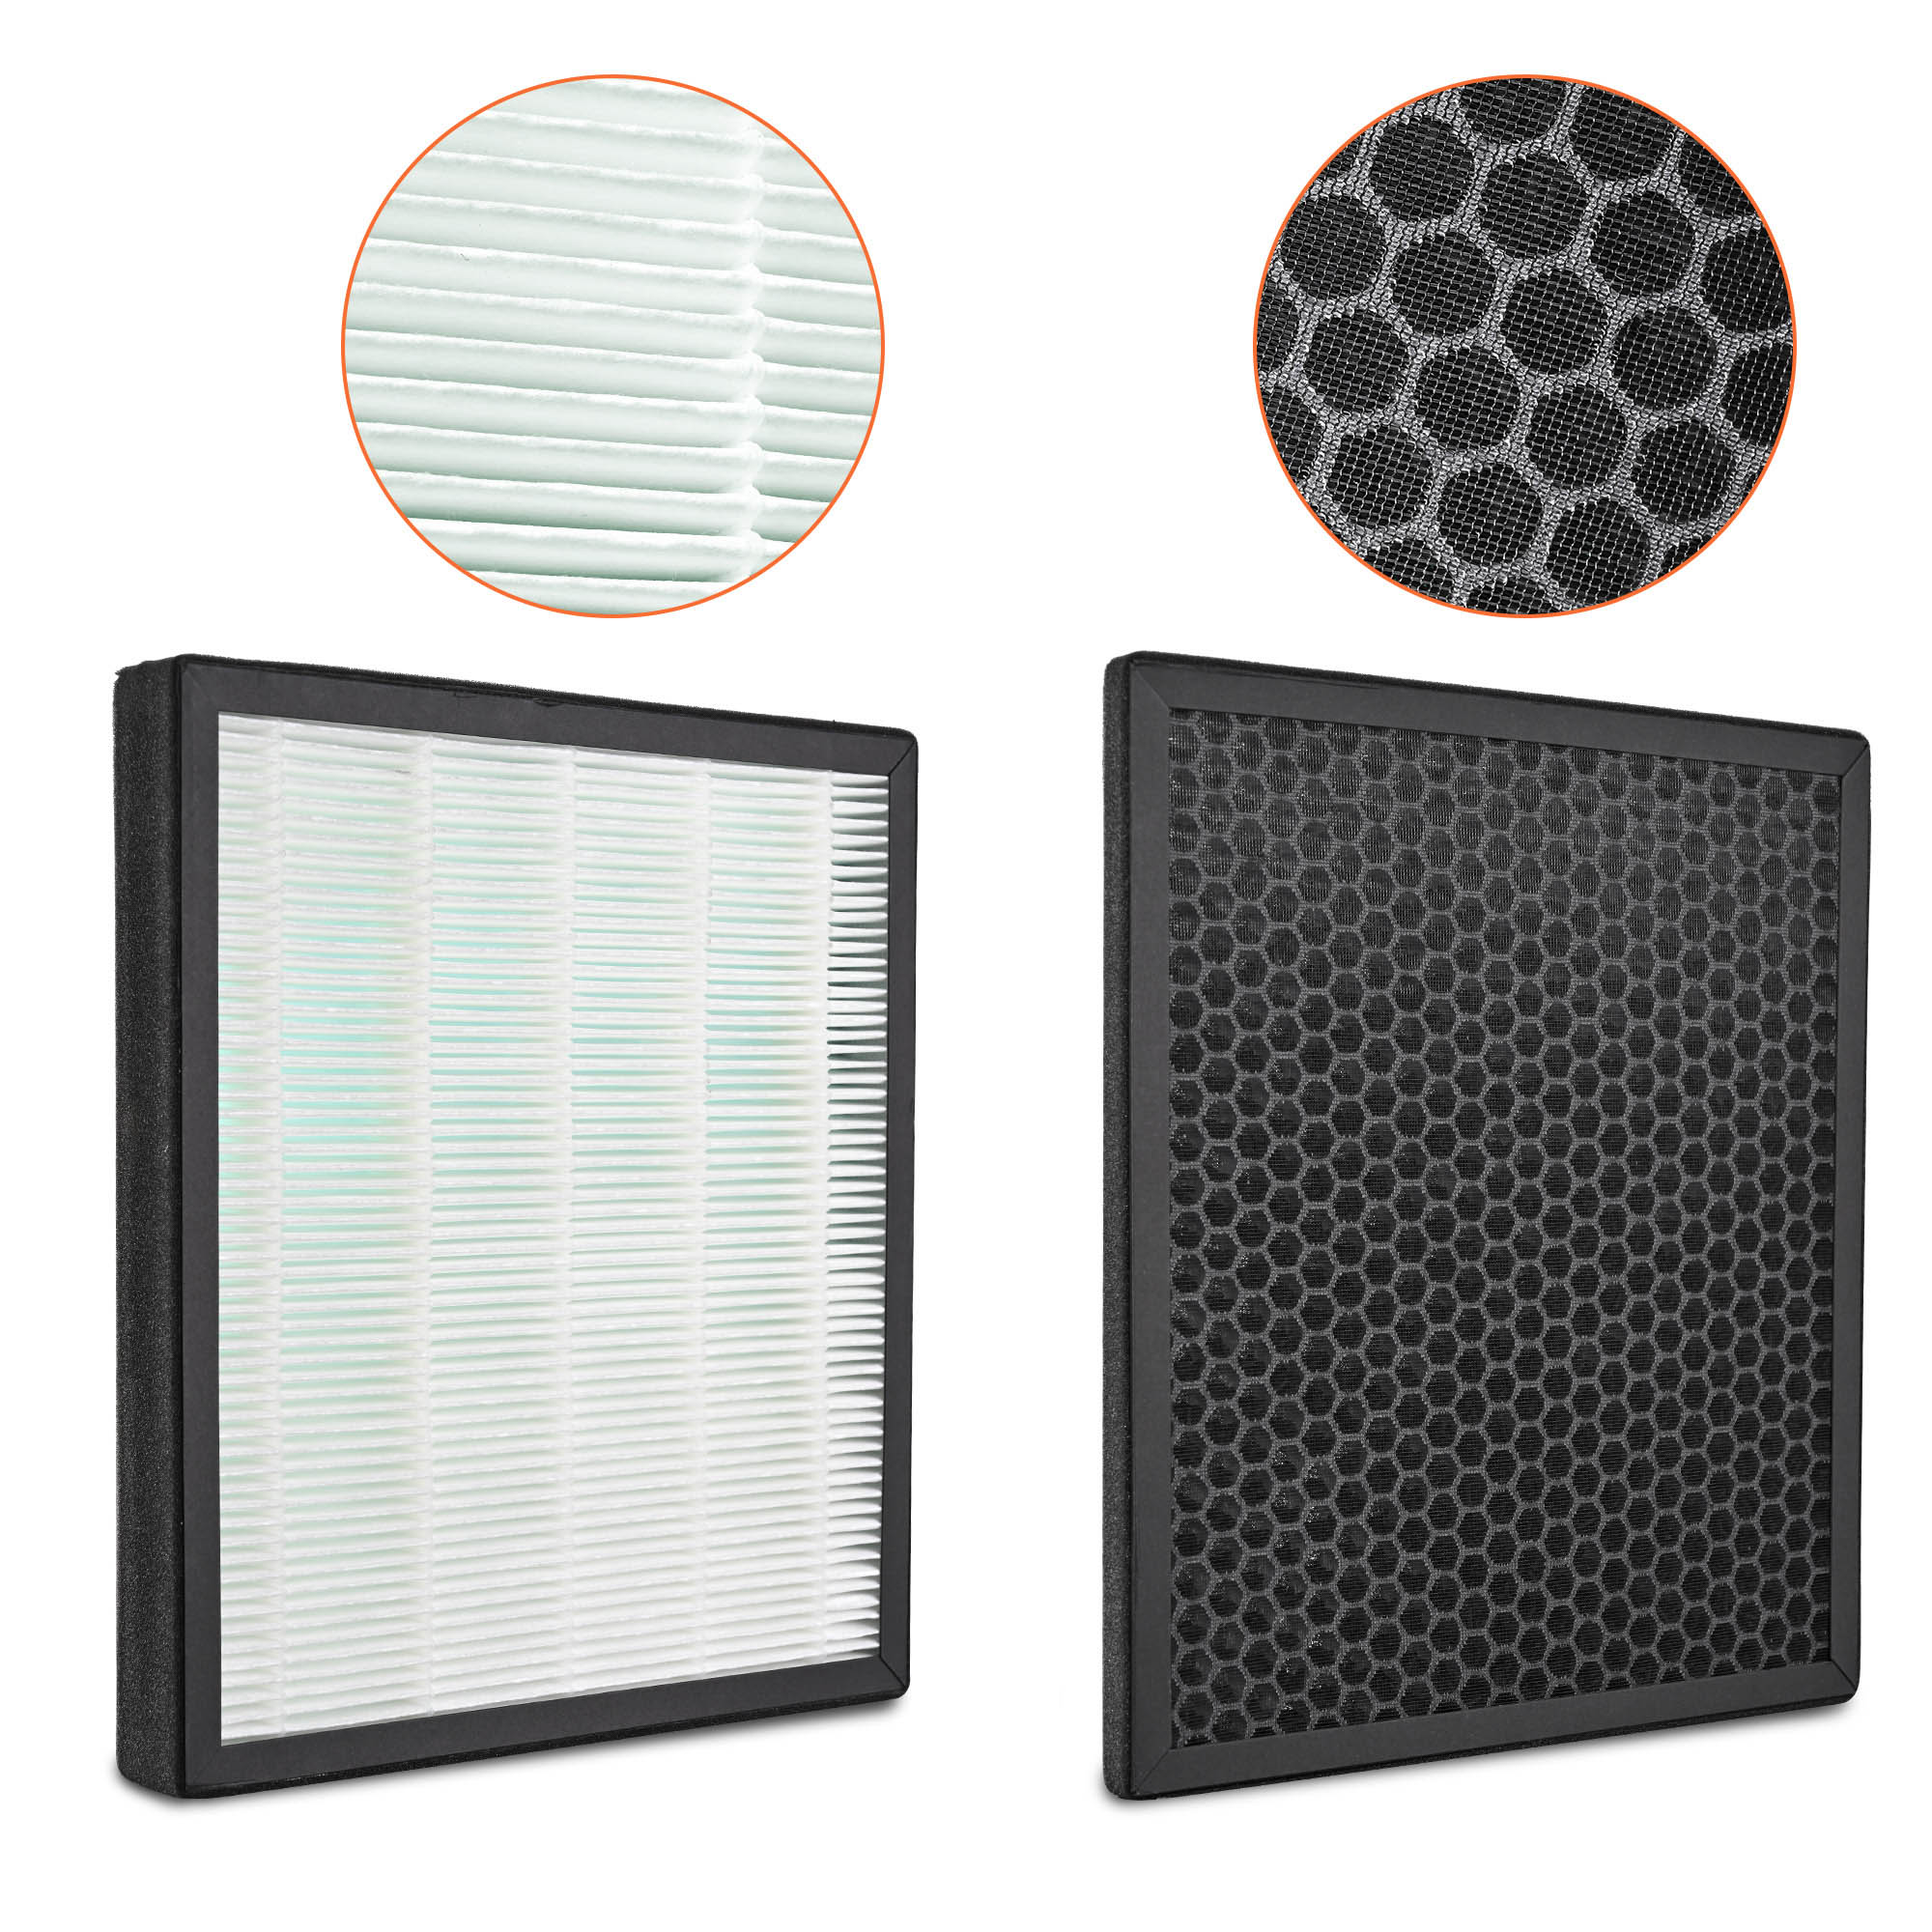 Yescom 12 Pack H13 True HEPA Filter Replacement for 5-Stage Air Purifier Home Large Room